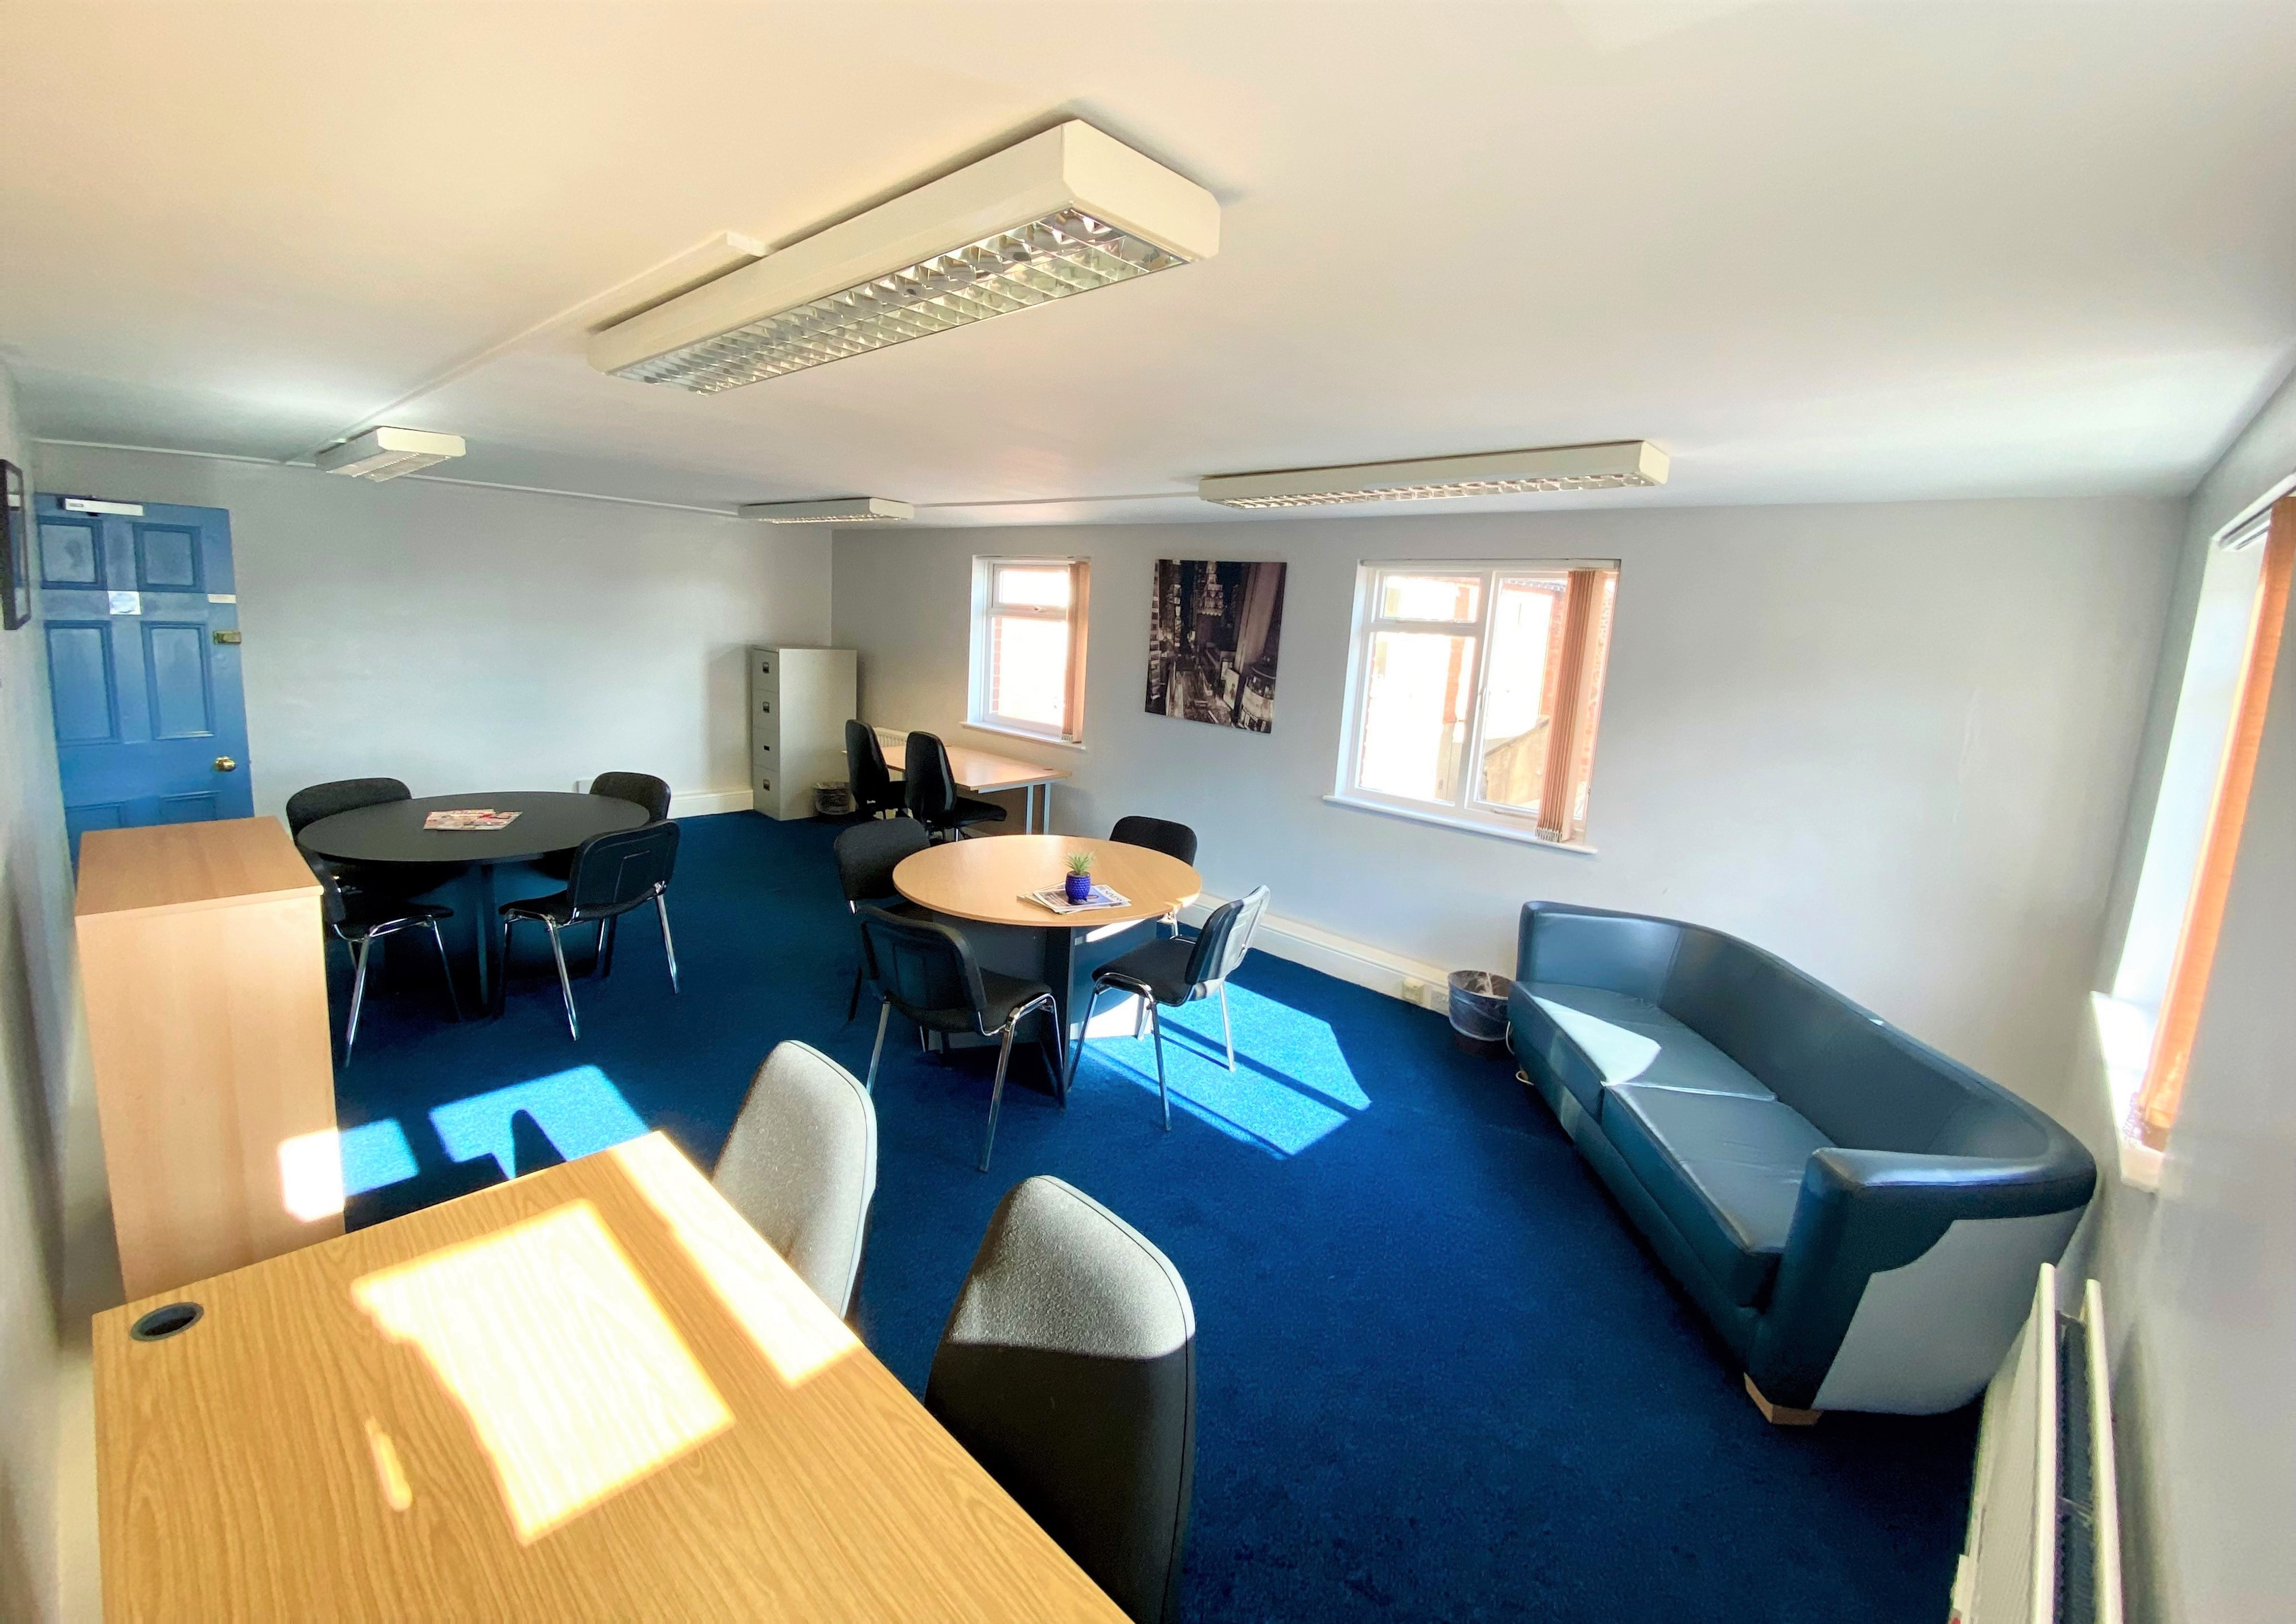 Office Meeting Room Hire Rent in Fishergate York